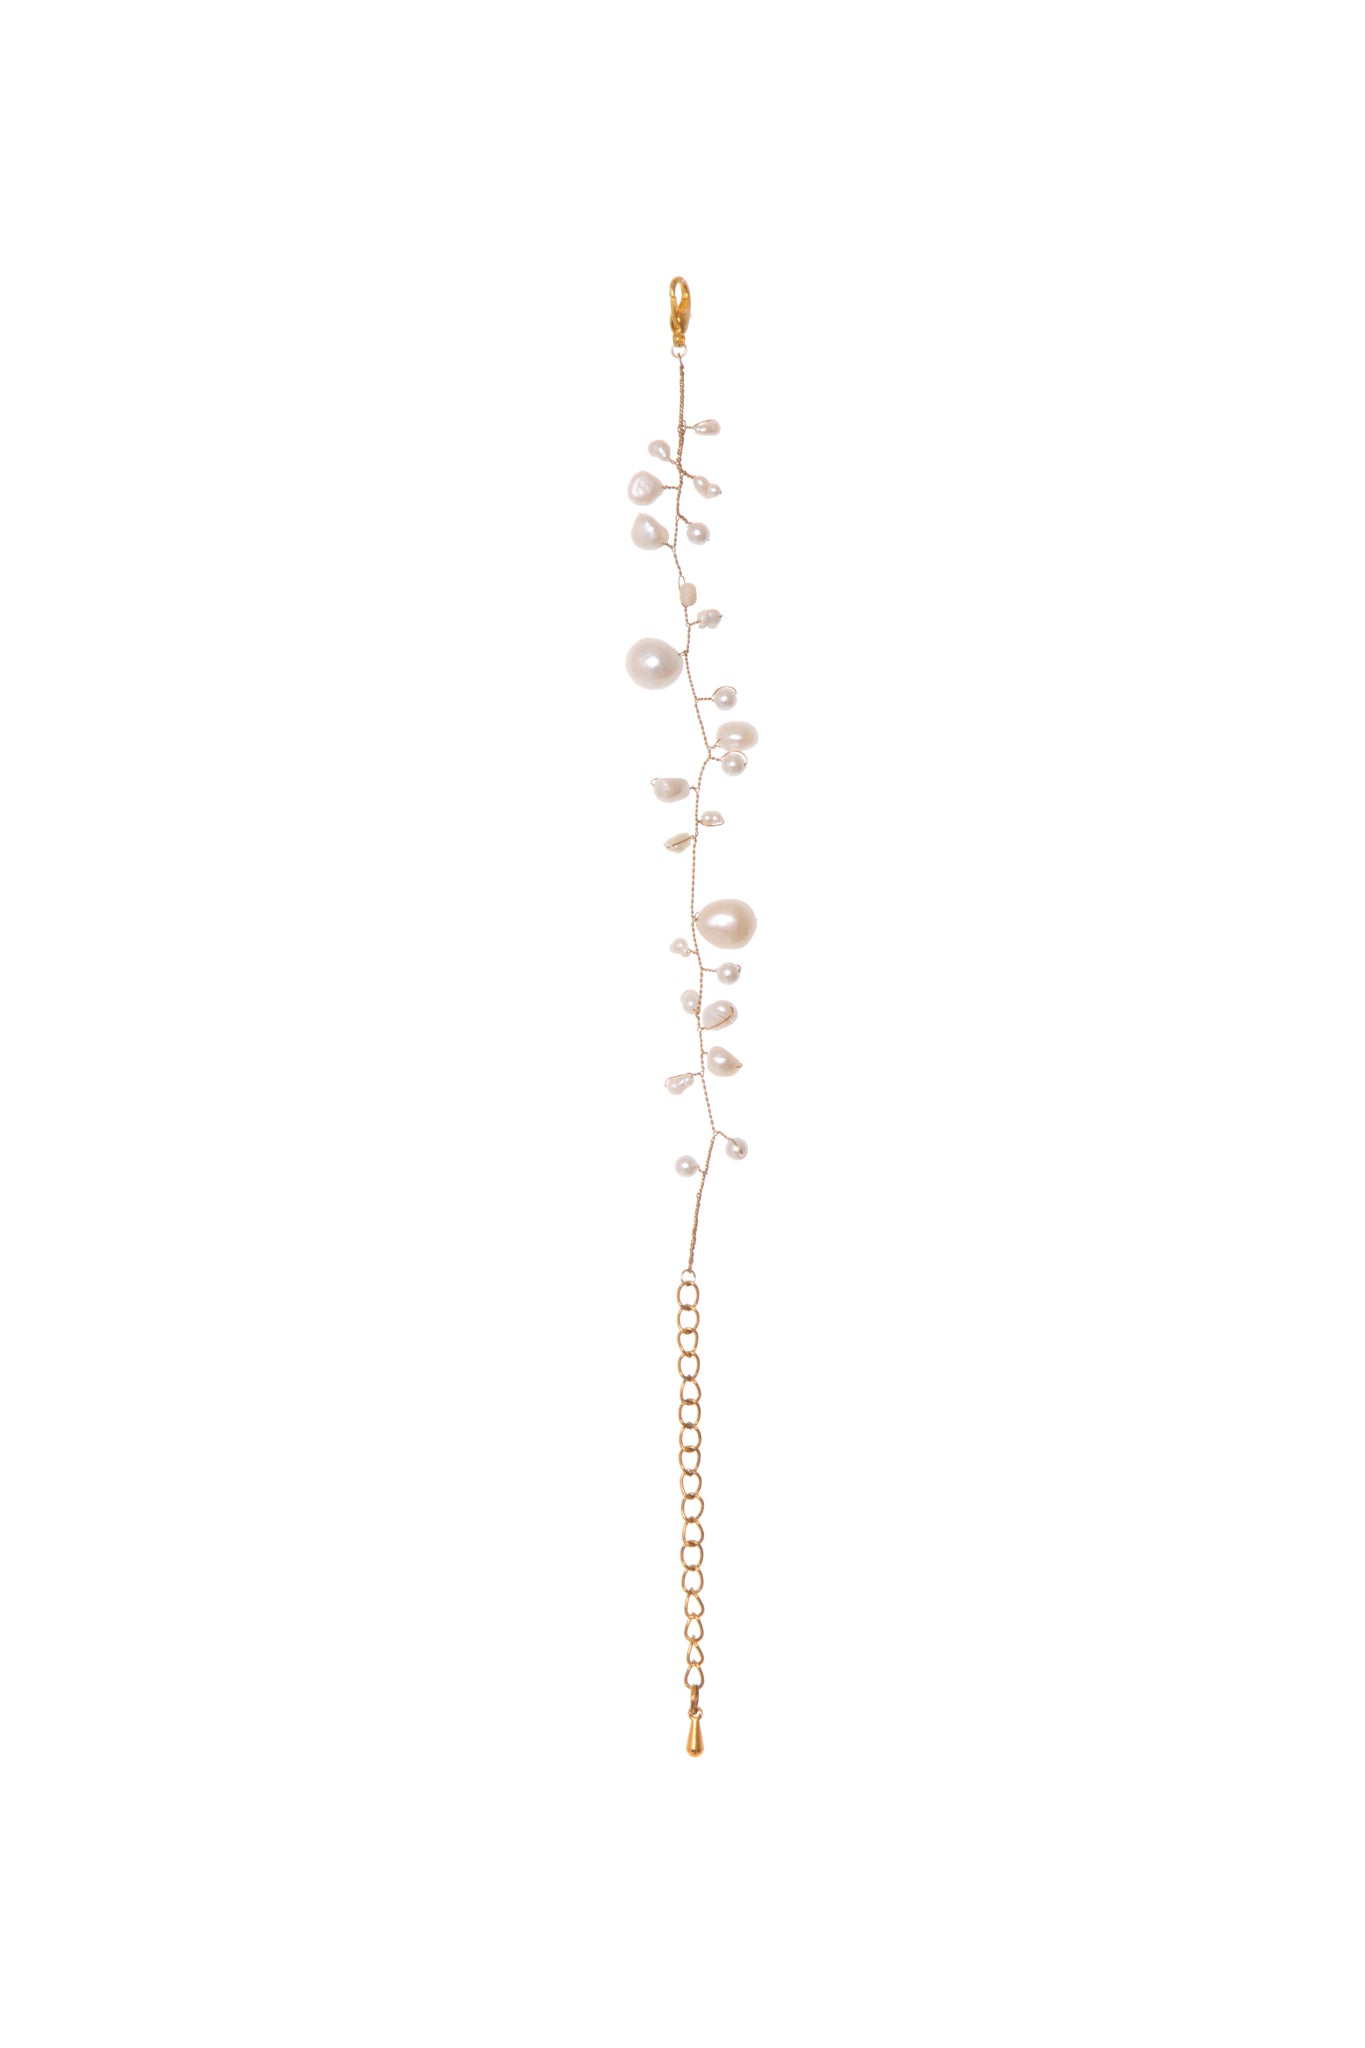 Dainty freshwater pearls and a delicate golden wire make up the Leaf Bracelet, perfect for adding a touch of organic beauty to your wedding day ensemble